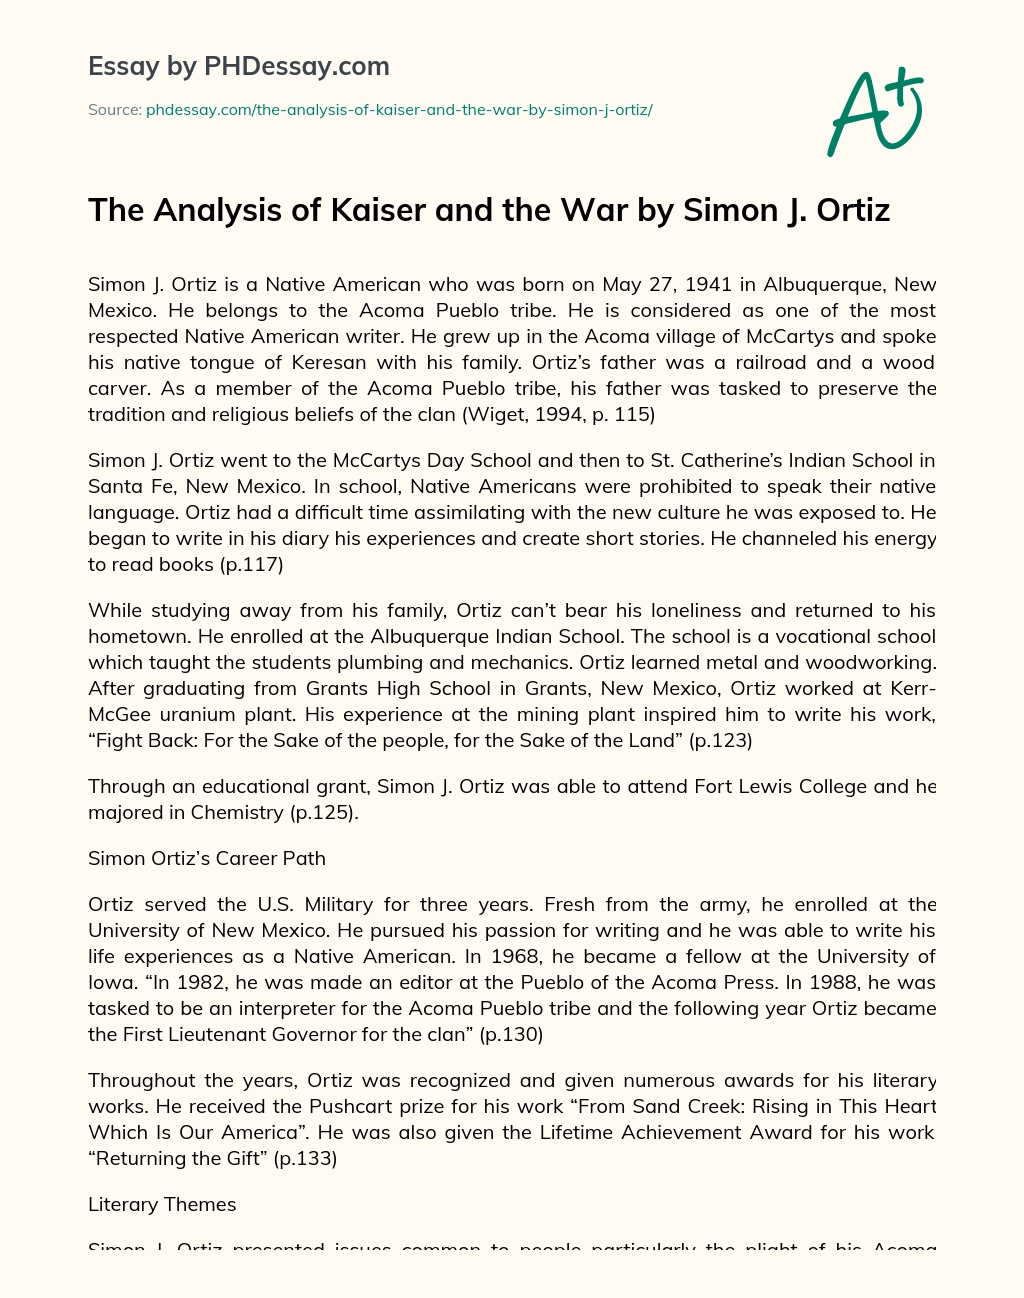 The Analysis of Kaiser and the War by Simon J. Ortiz essay